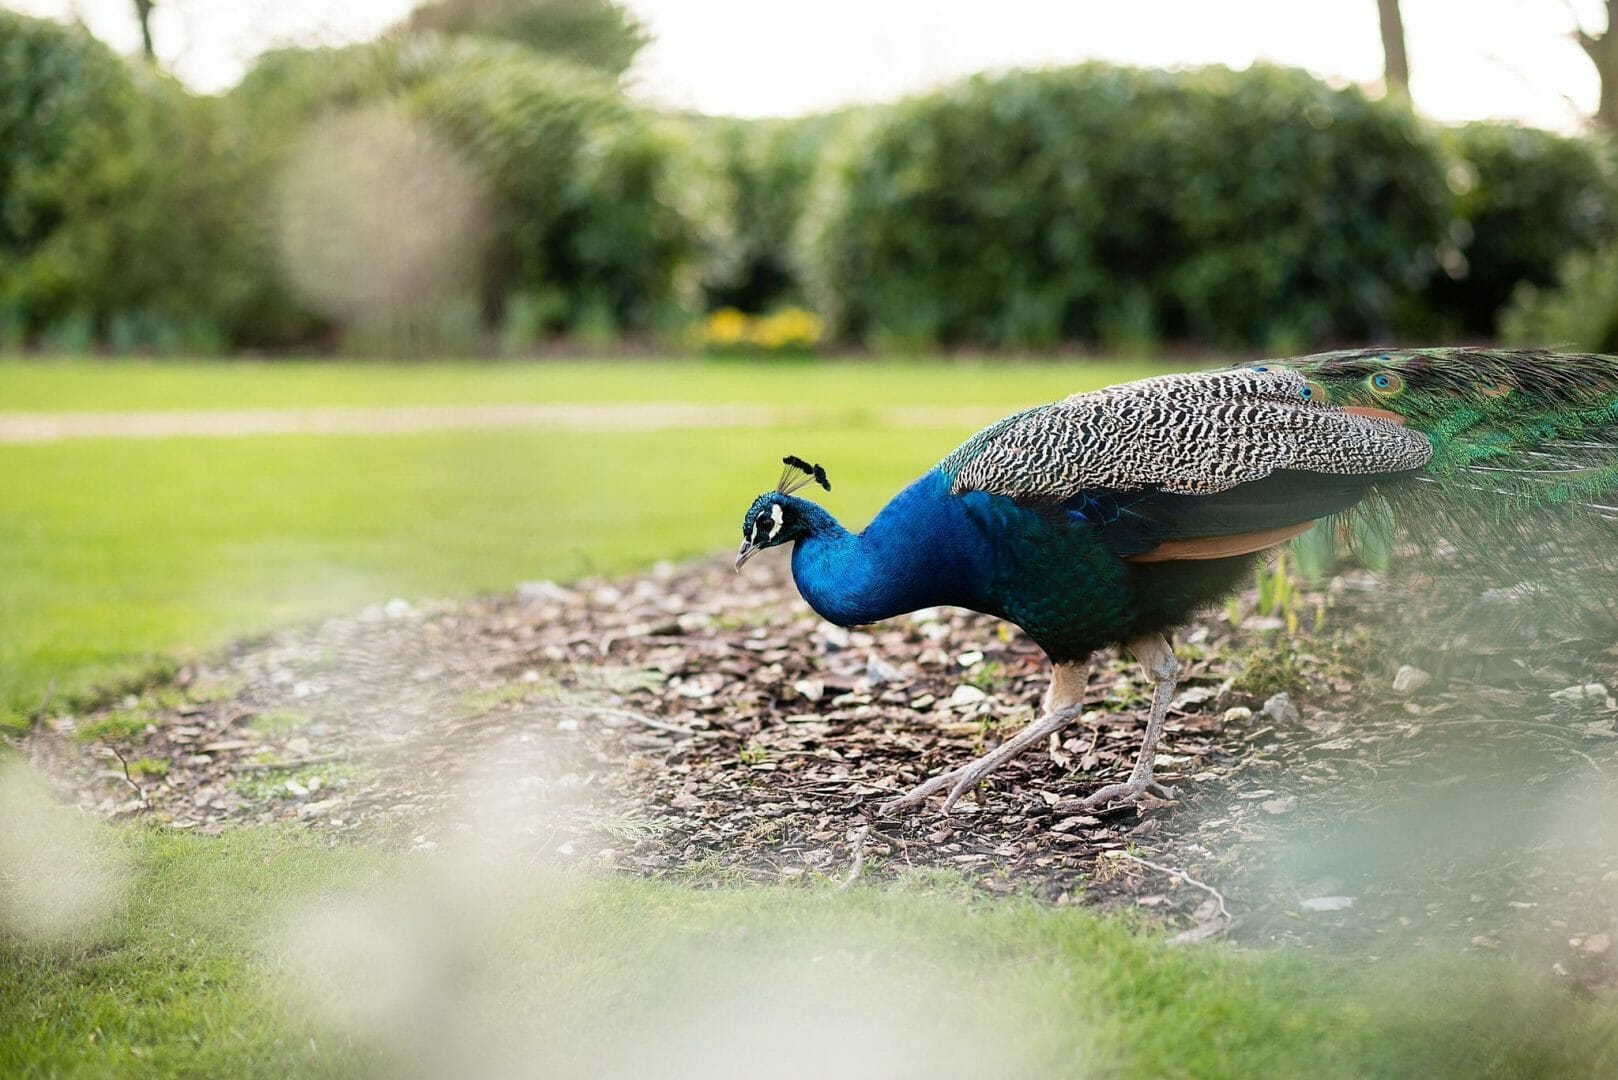 Peacock at Wiltshire wedding Photography